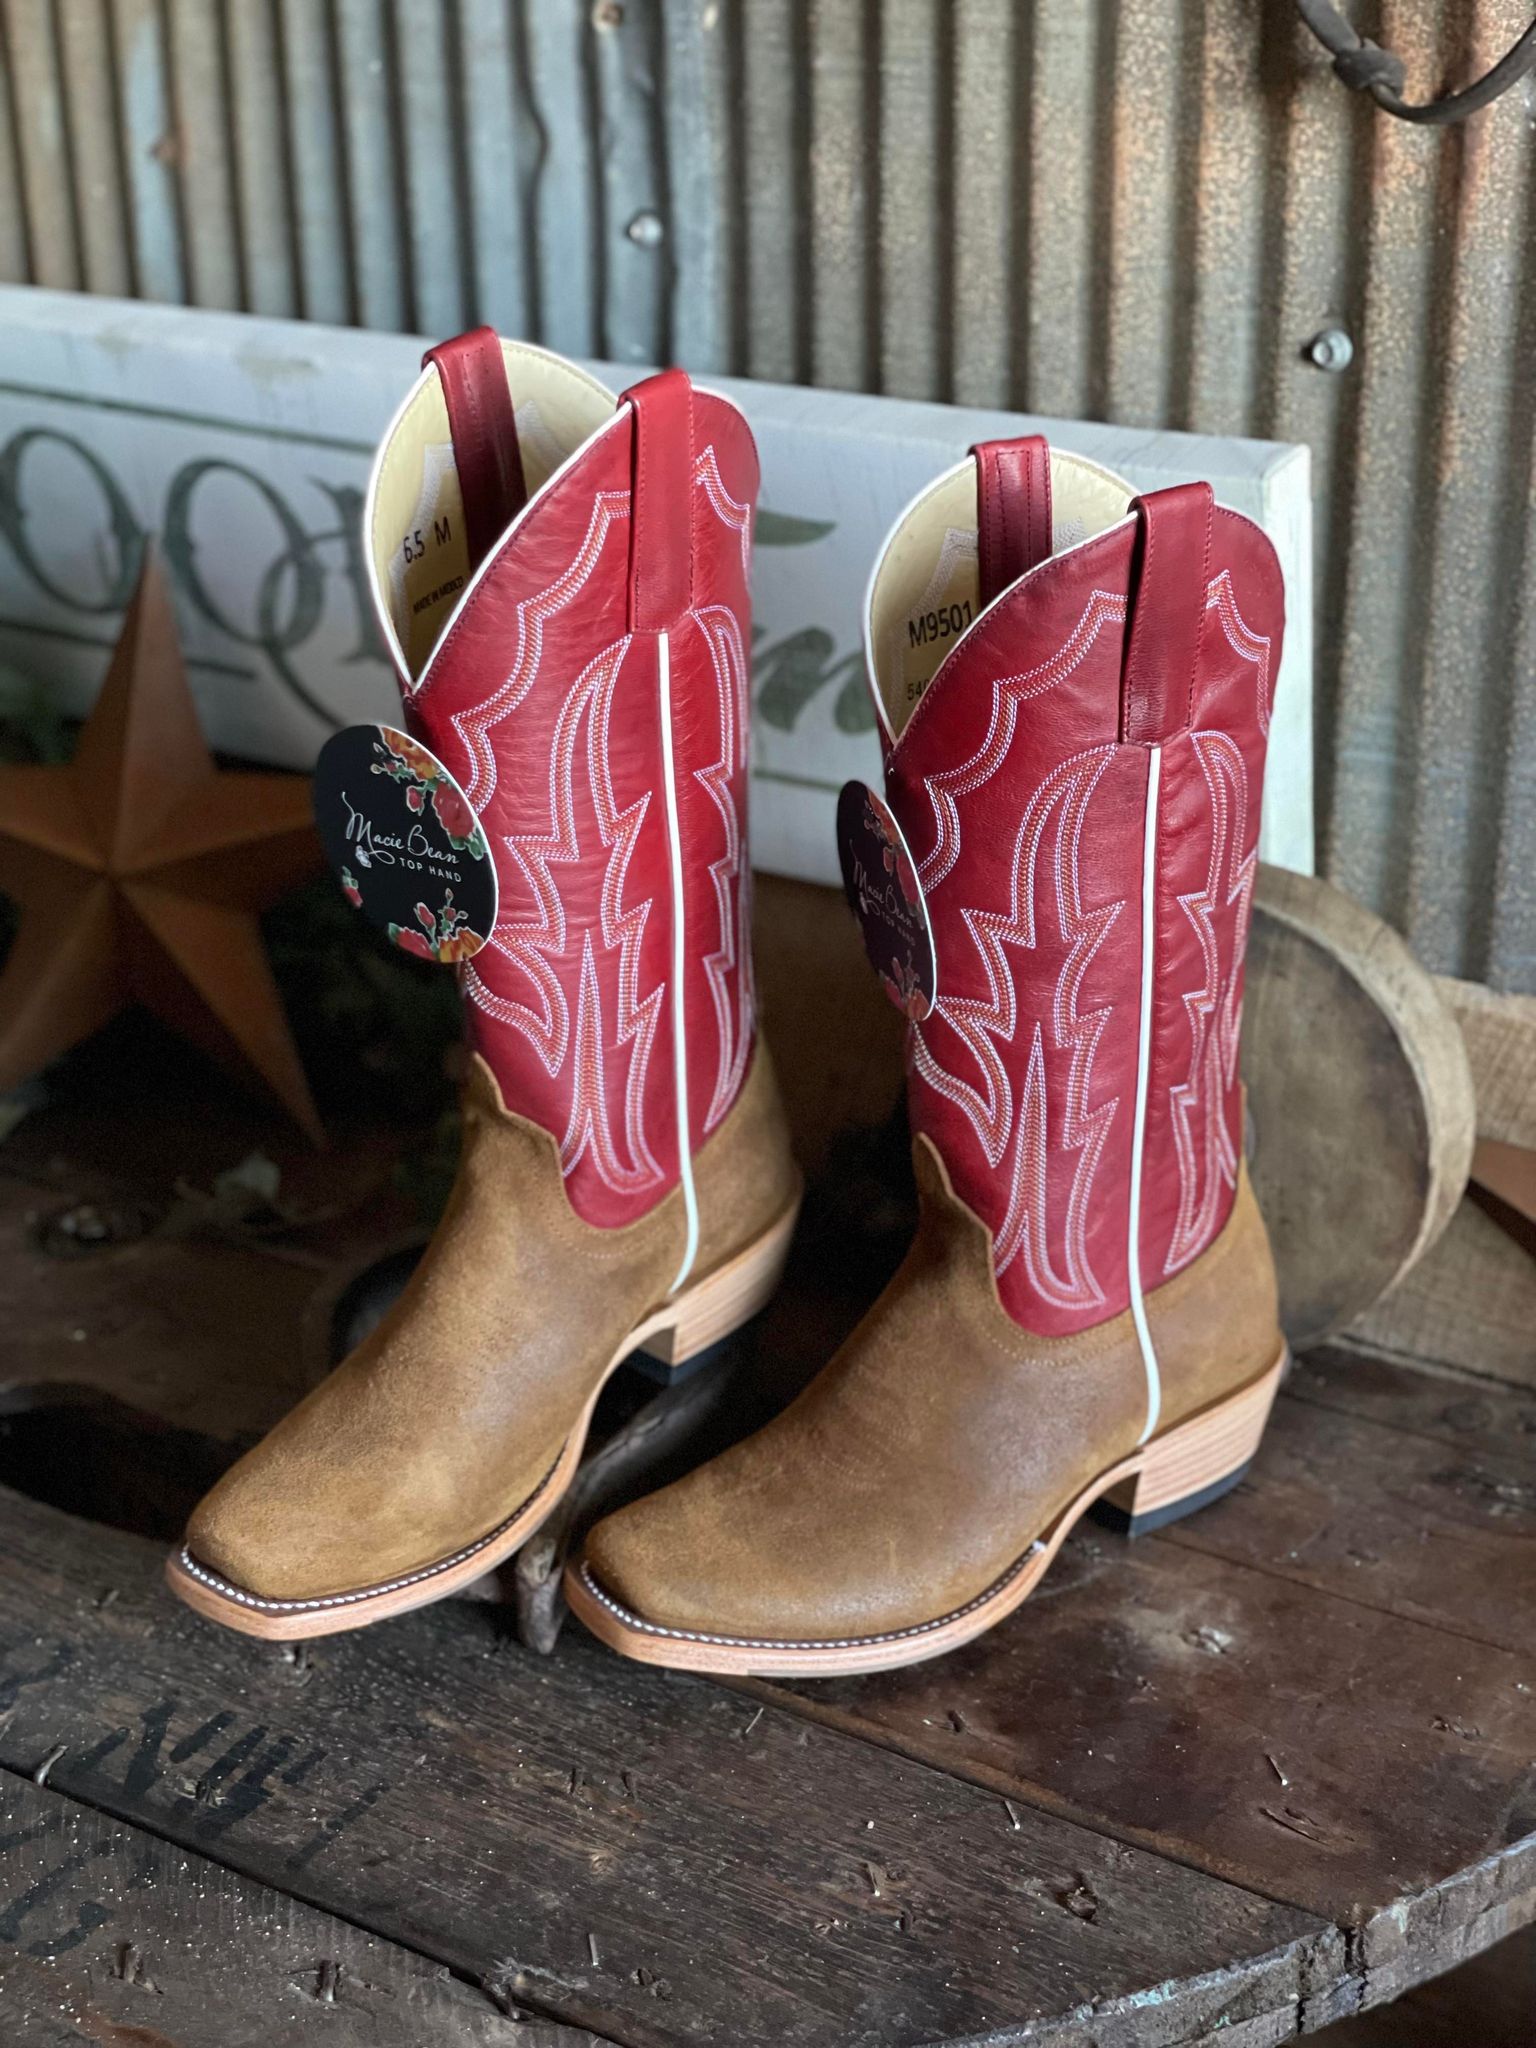 MB Top Hand Waxy Commander Cutter Toe Boot-Women's Boots-Anderson Bean-Lucky J Boots & More, Women's, Men's, & Kids Western Store Located in Carthage, MO